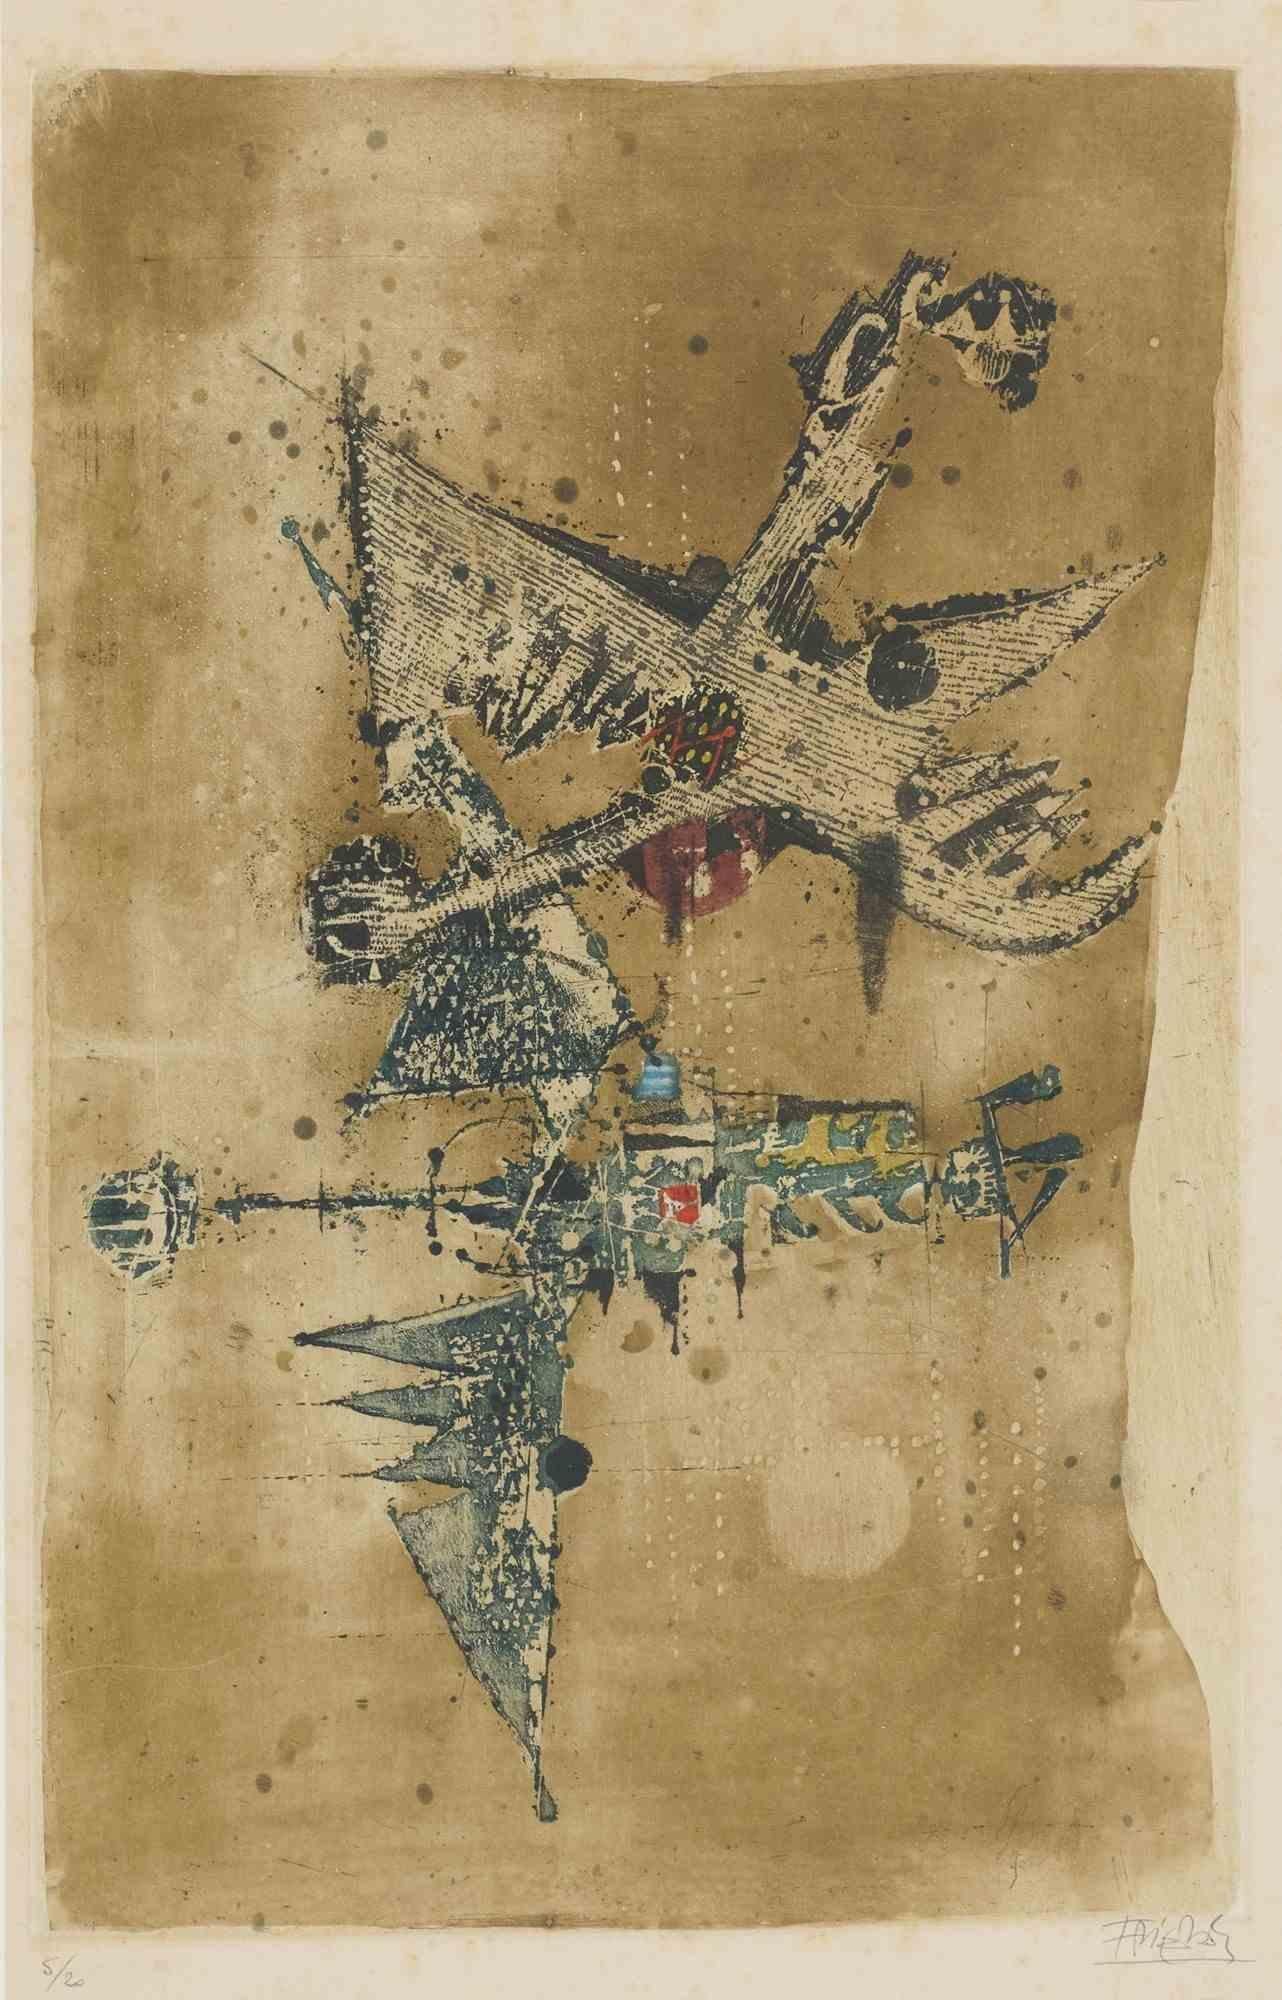 L'oiseau bleu is a print realized by Johnny Friedlaender (Plonia, 1912 - Paris, 1992).

Etching on paper.

Hand-Signed lower right, edition lower left. Numbered, edition of 5/20 prints.

The artwork is realized strongly through expressive strokes of